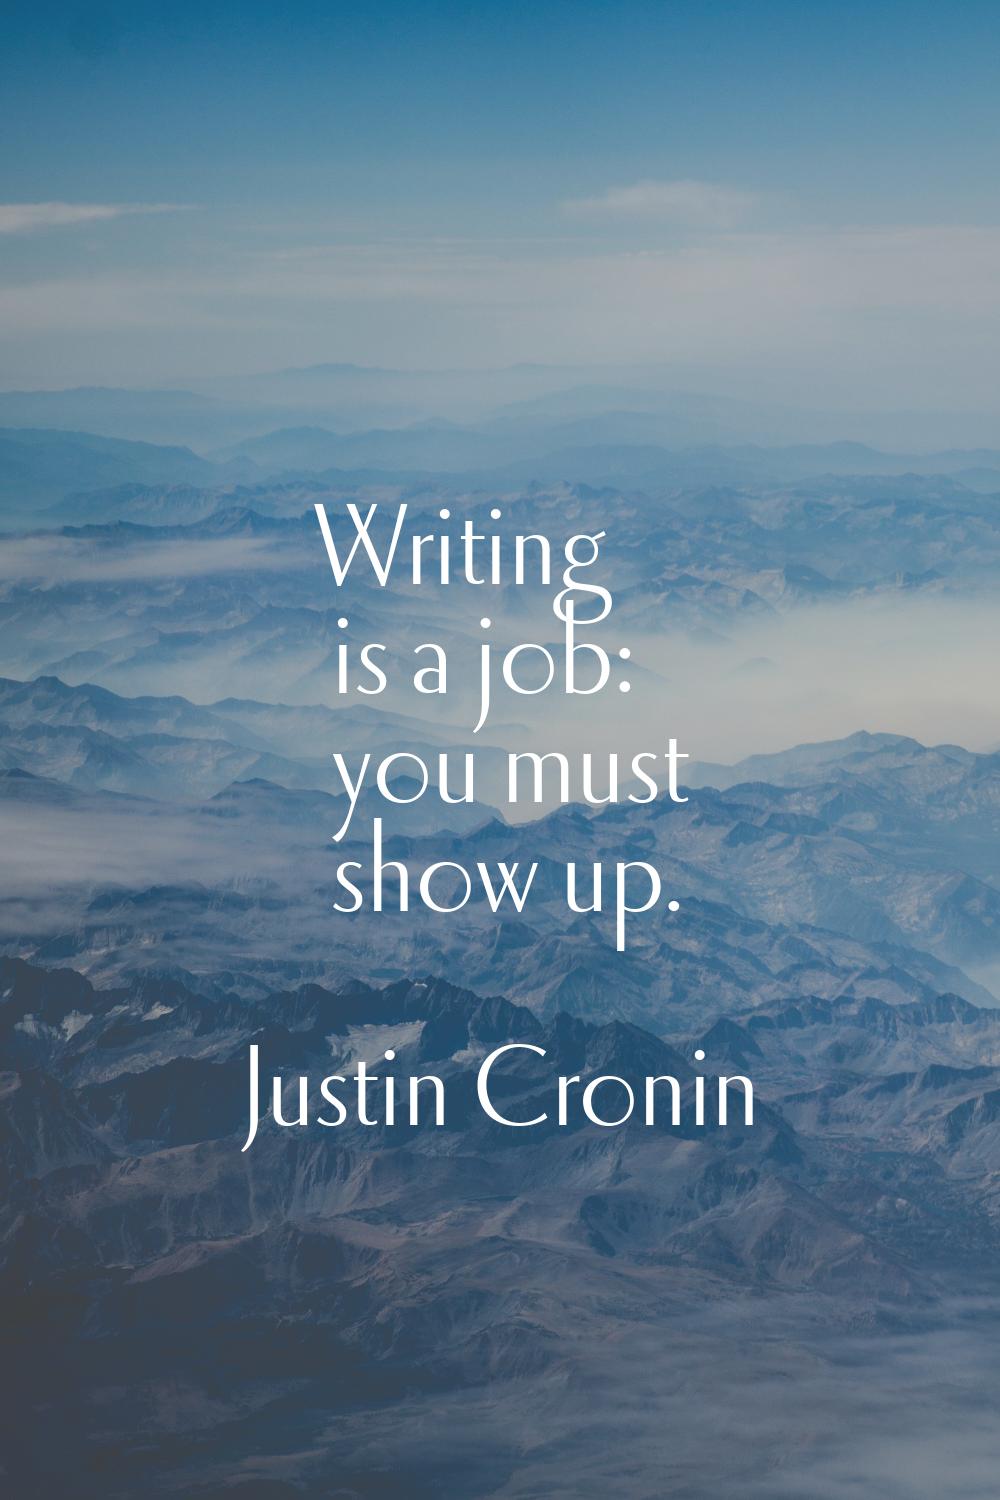 Writing is a job: you must show up.